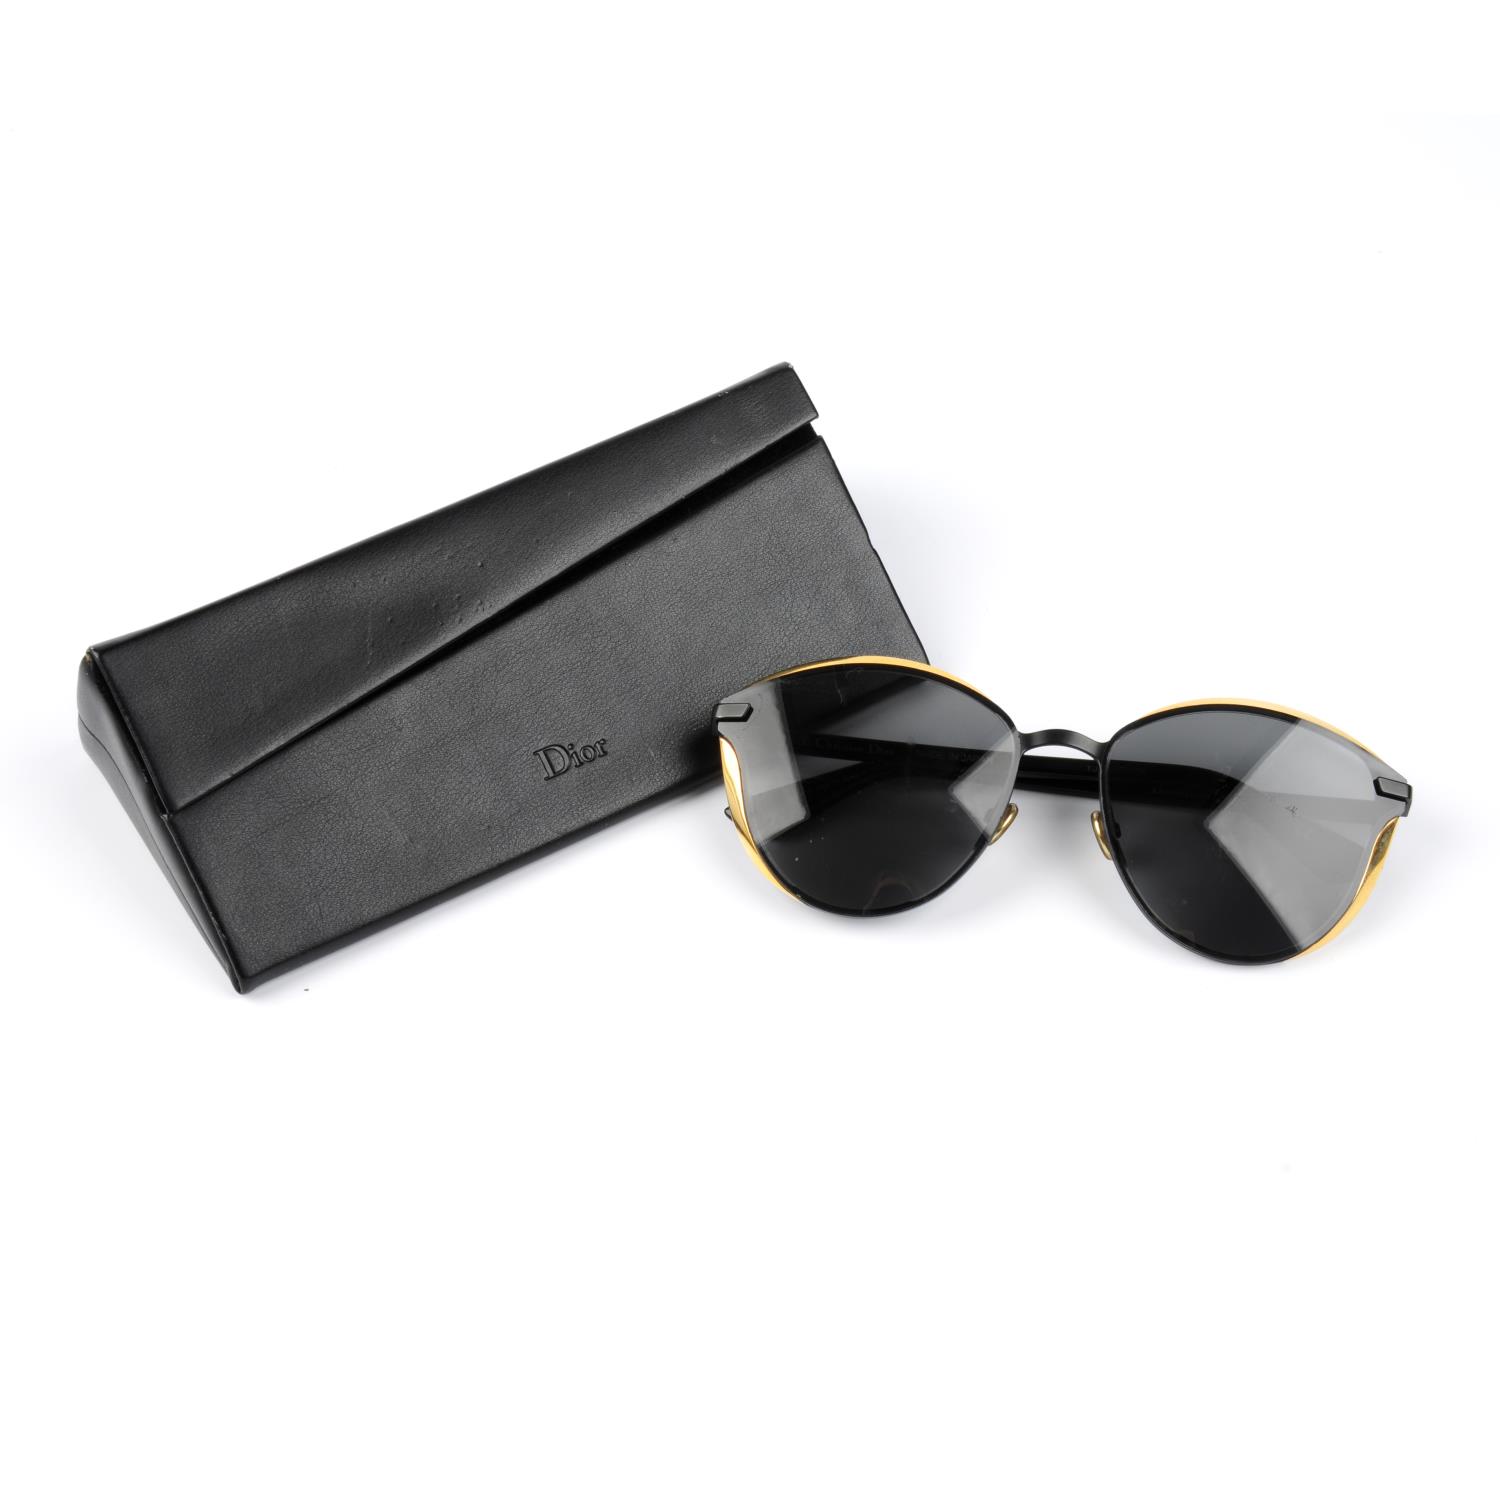 CHRISTIAN DIOR - a pair of limited edition sunglasses. - Image 4 of 4